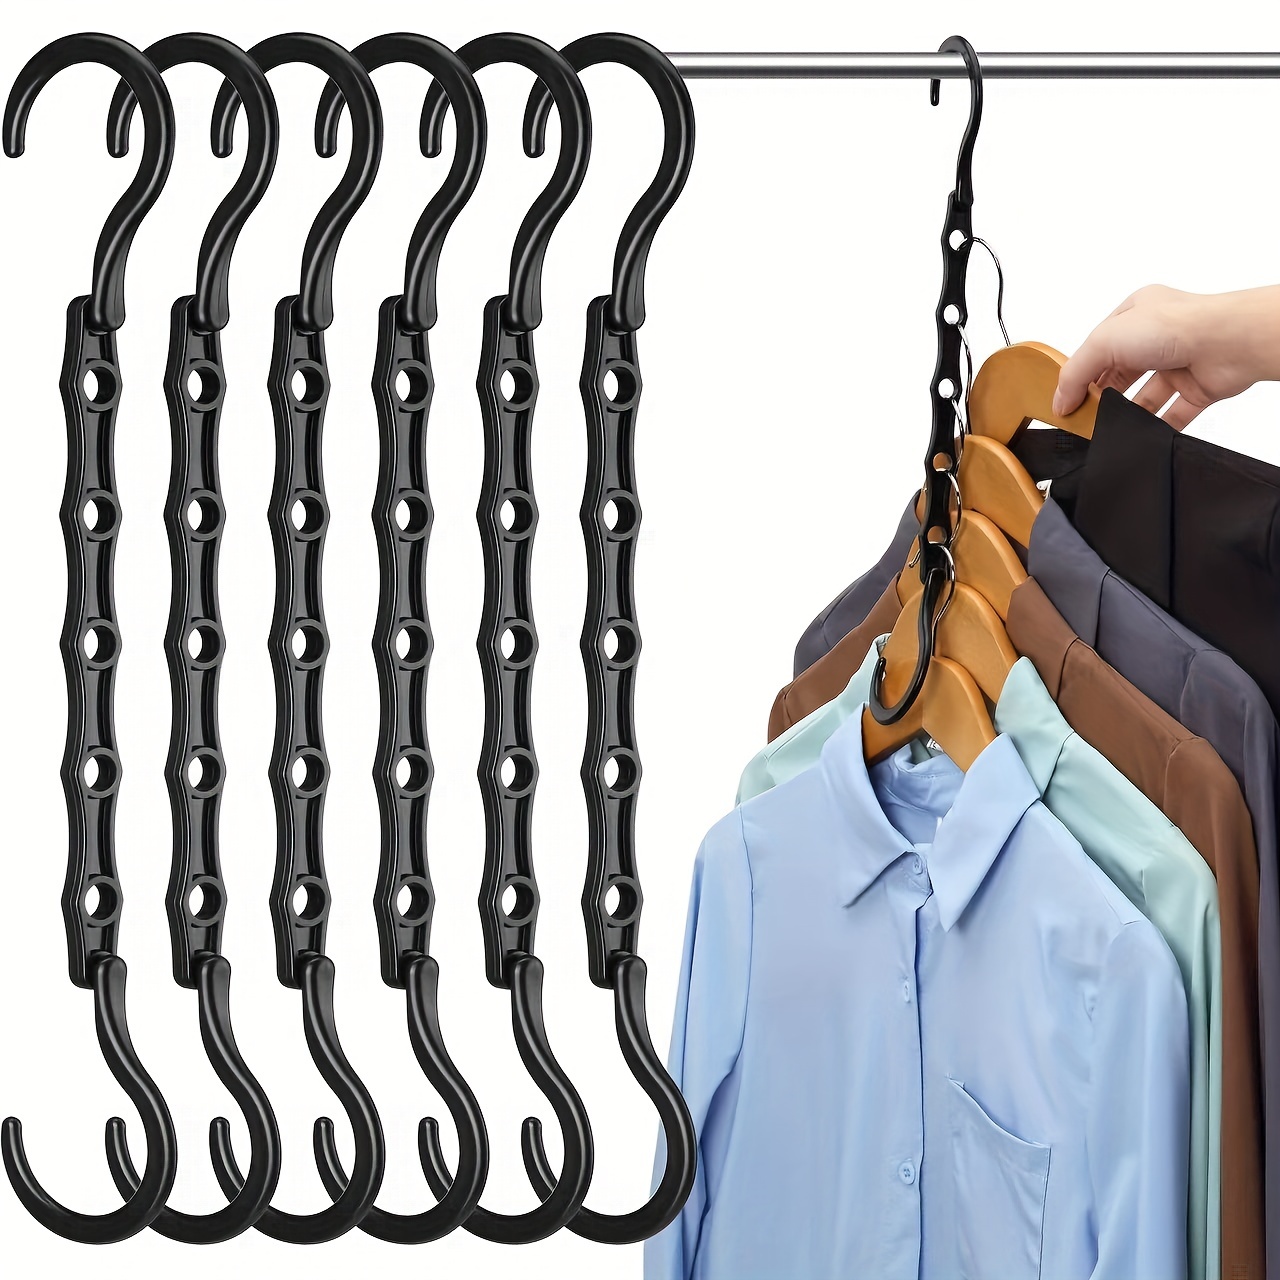 4 Pack Magic Space Saving Clothes Hangers 360 Degree Rotations